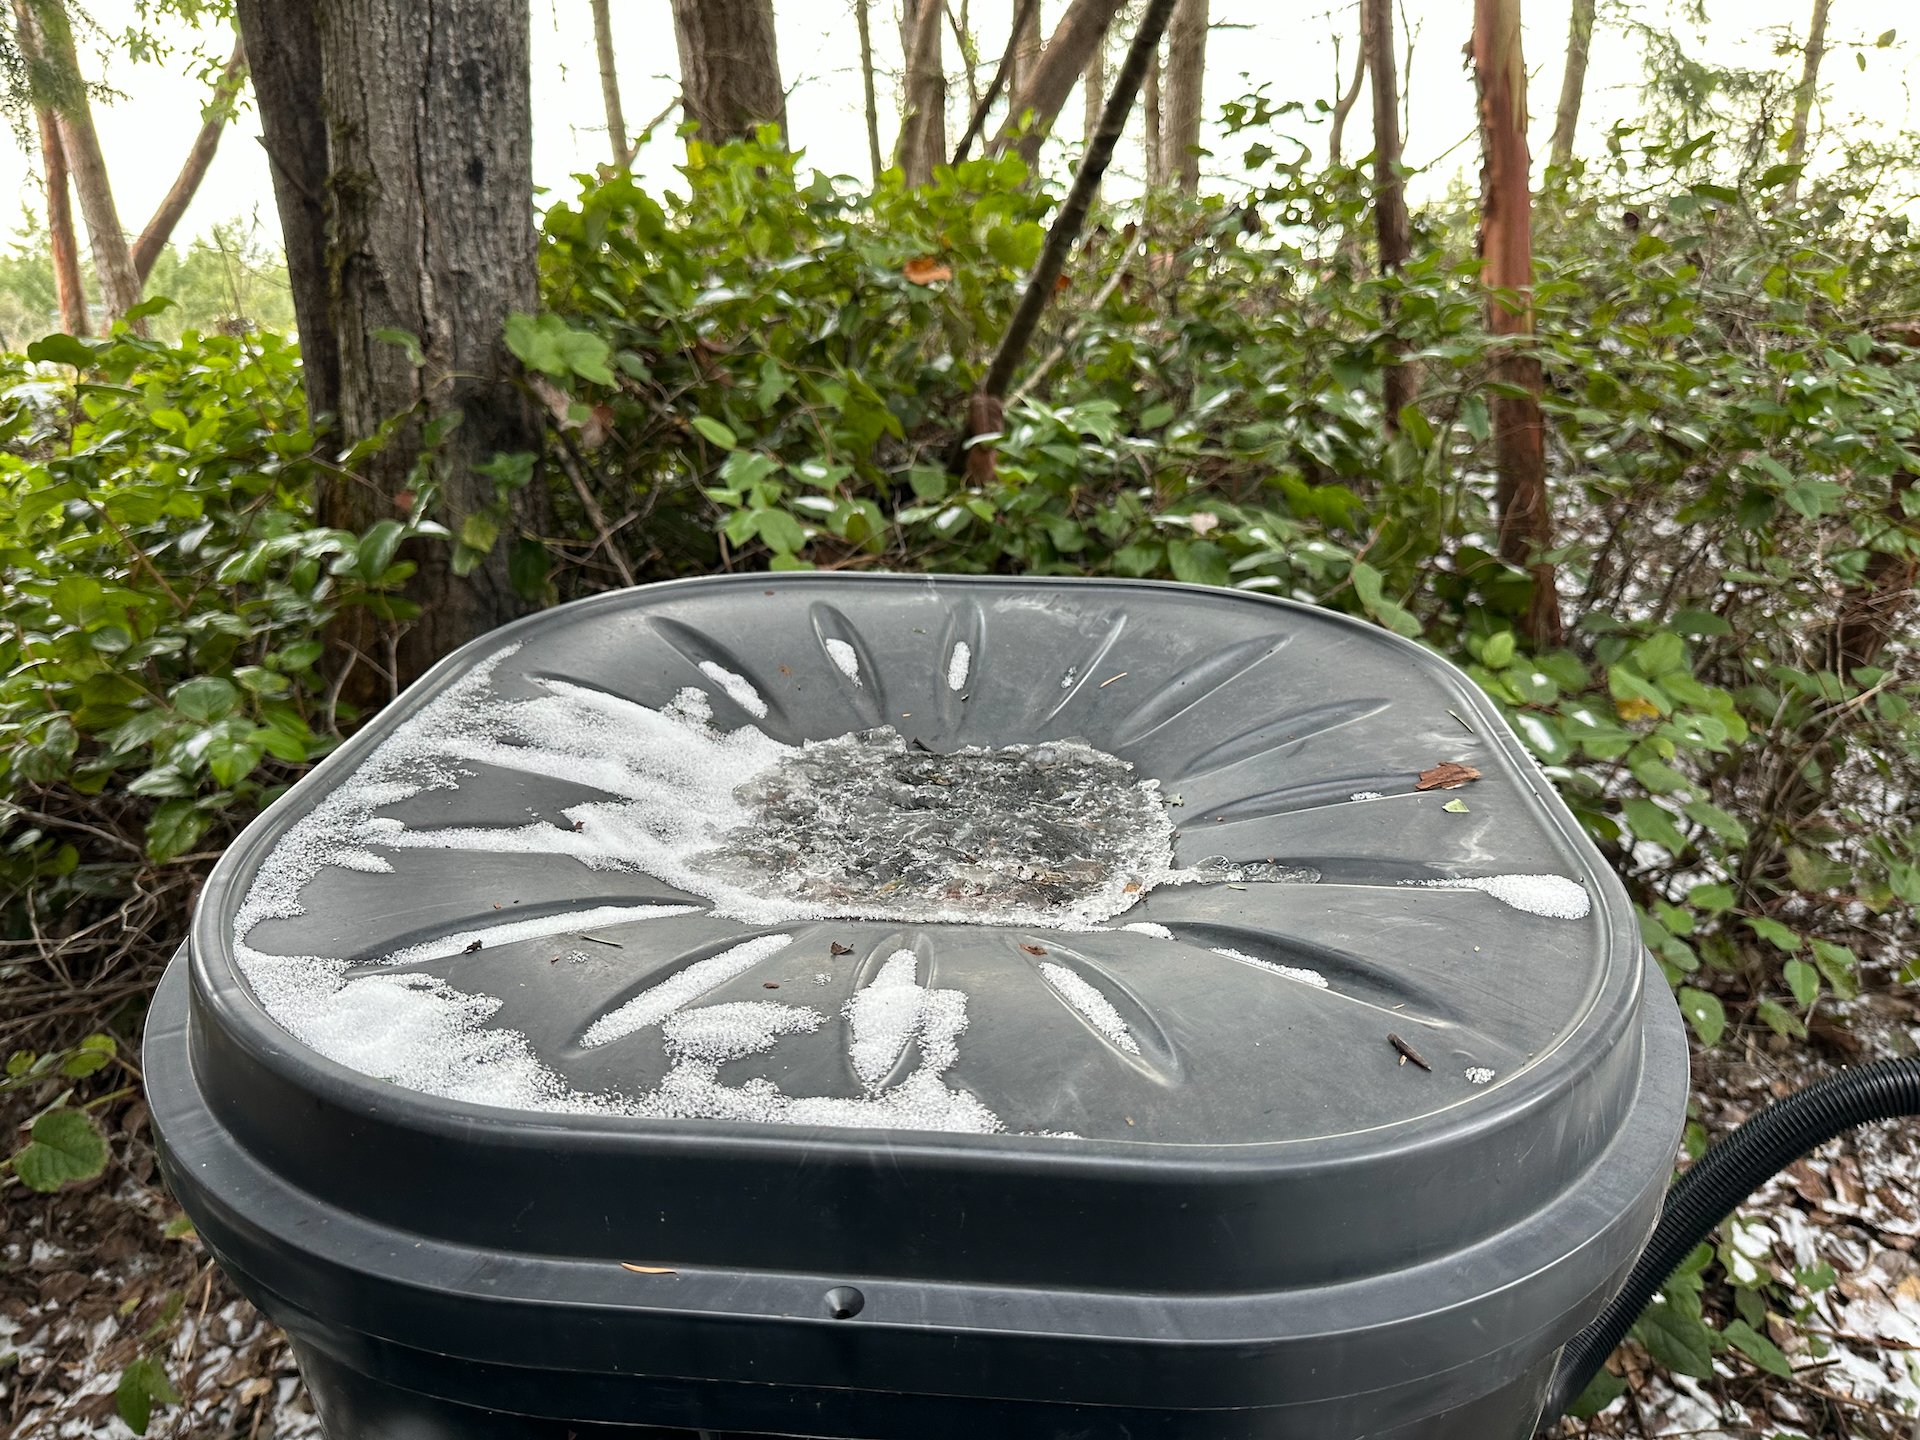  Our rain barrels were frozen all the way through, right to the ground. 